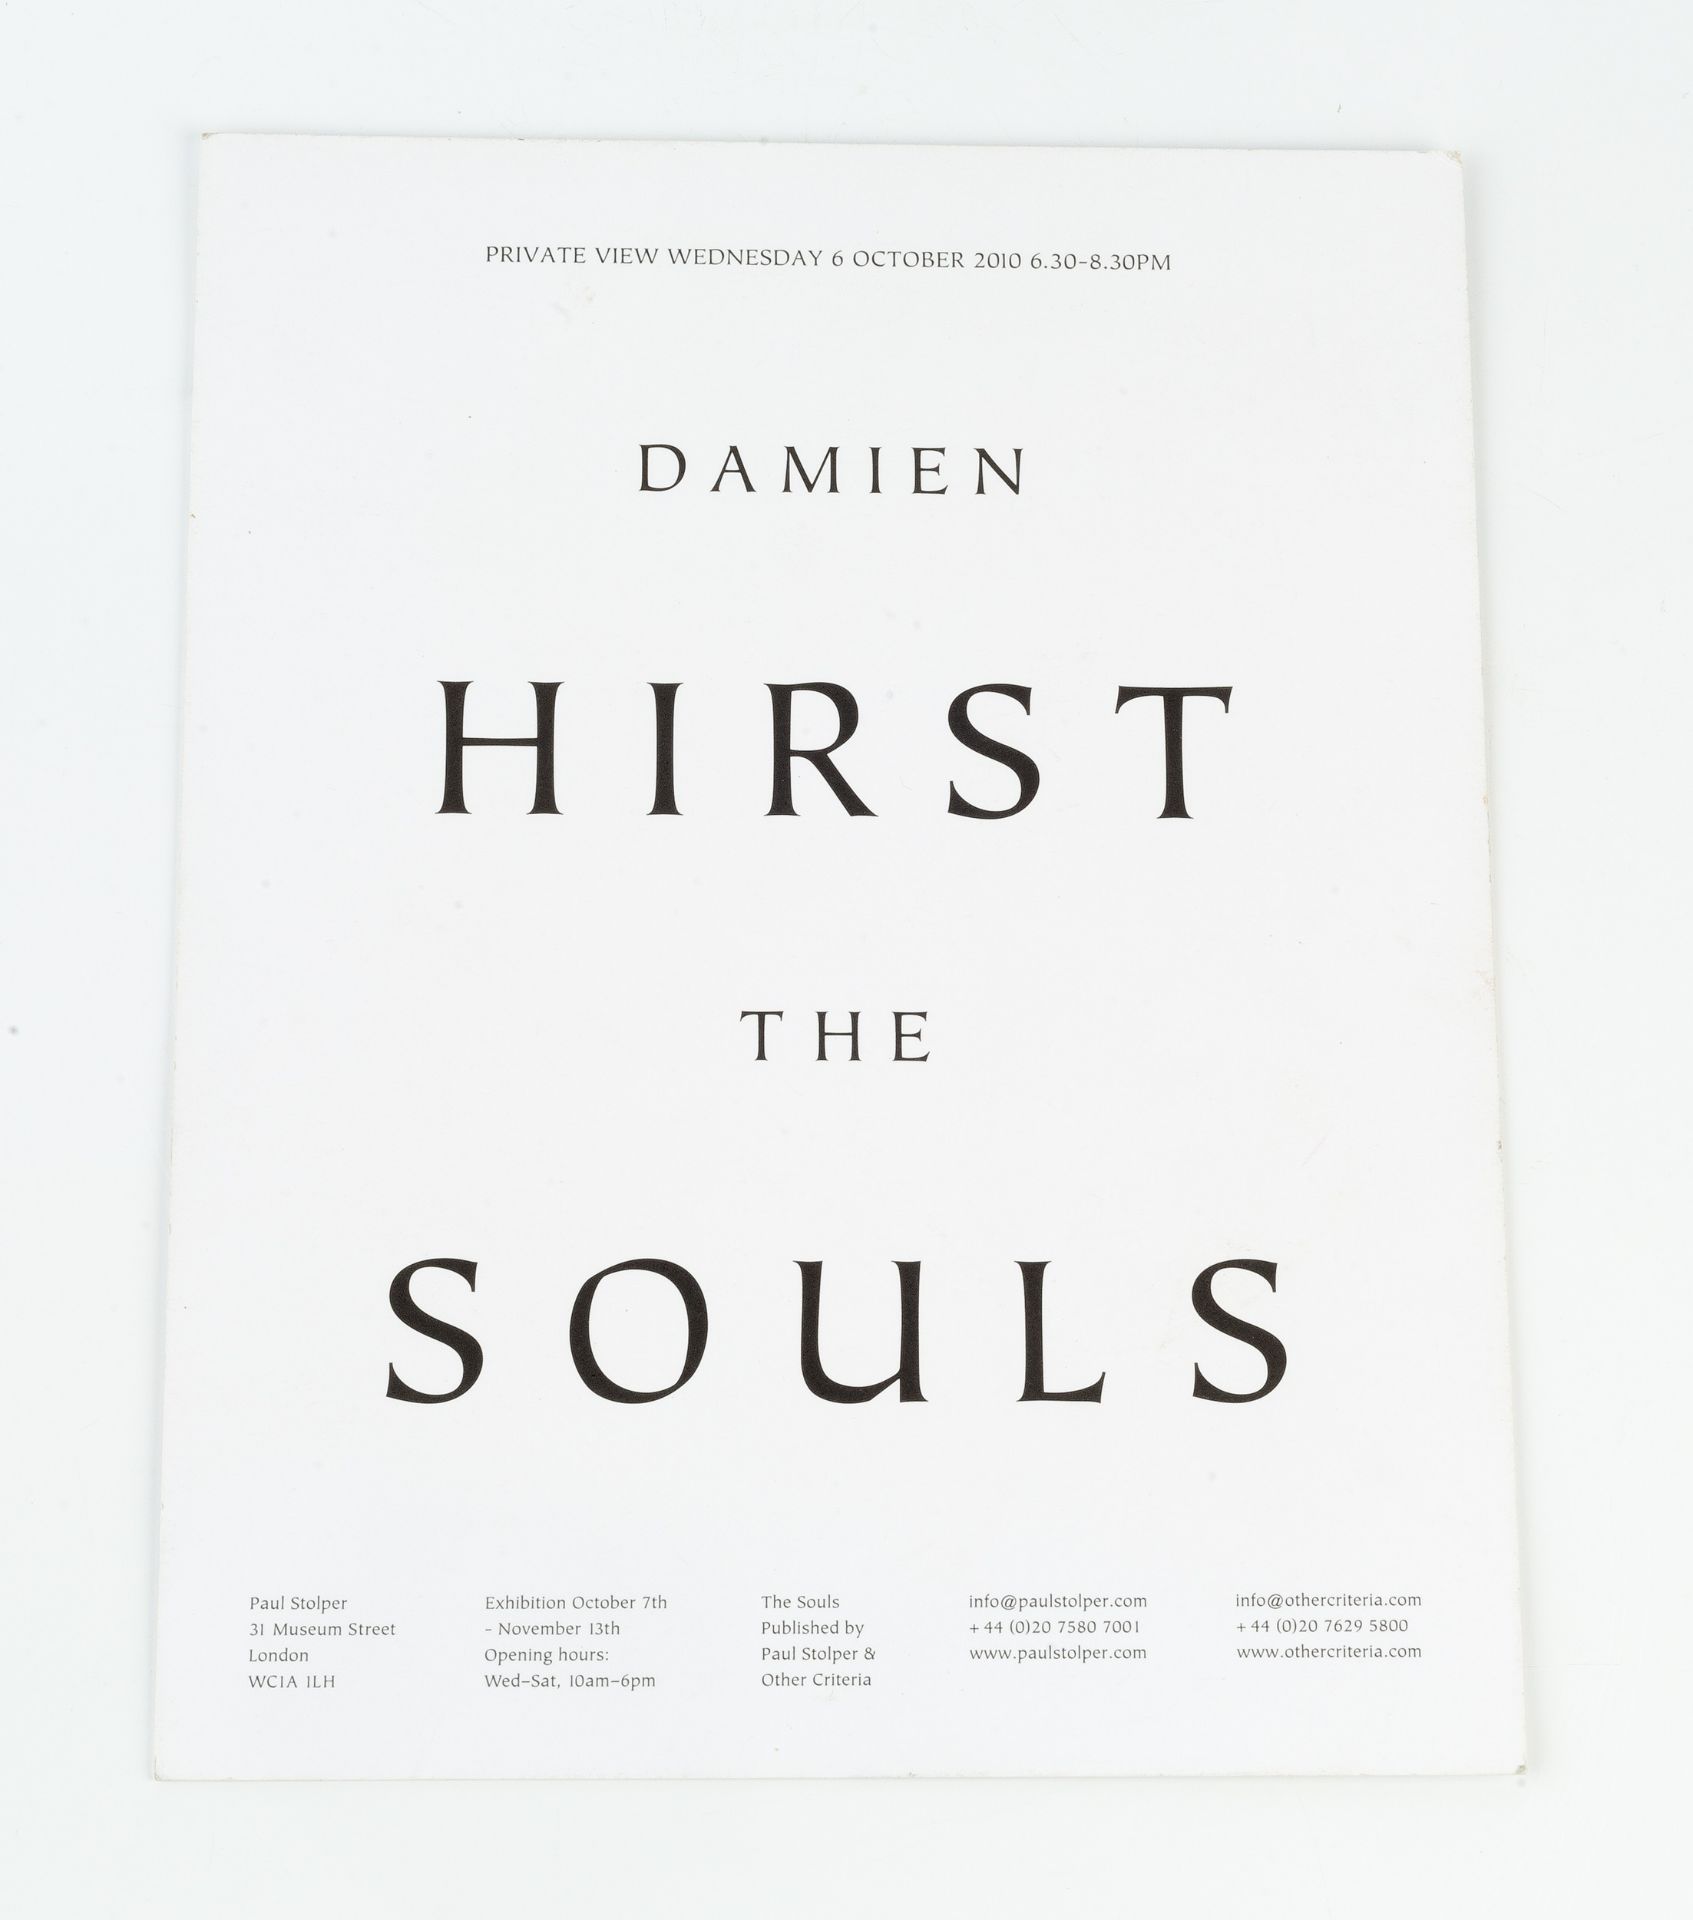 Damien Hirst (b.1965) The Souls, 2013 lithograph print for the invitation to the private view 42 x - Image 2 of 2